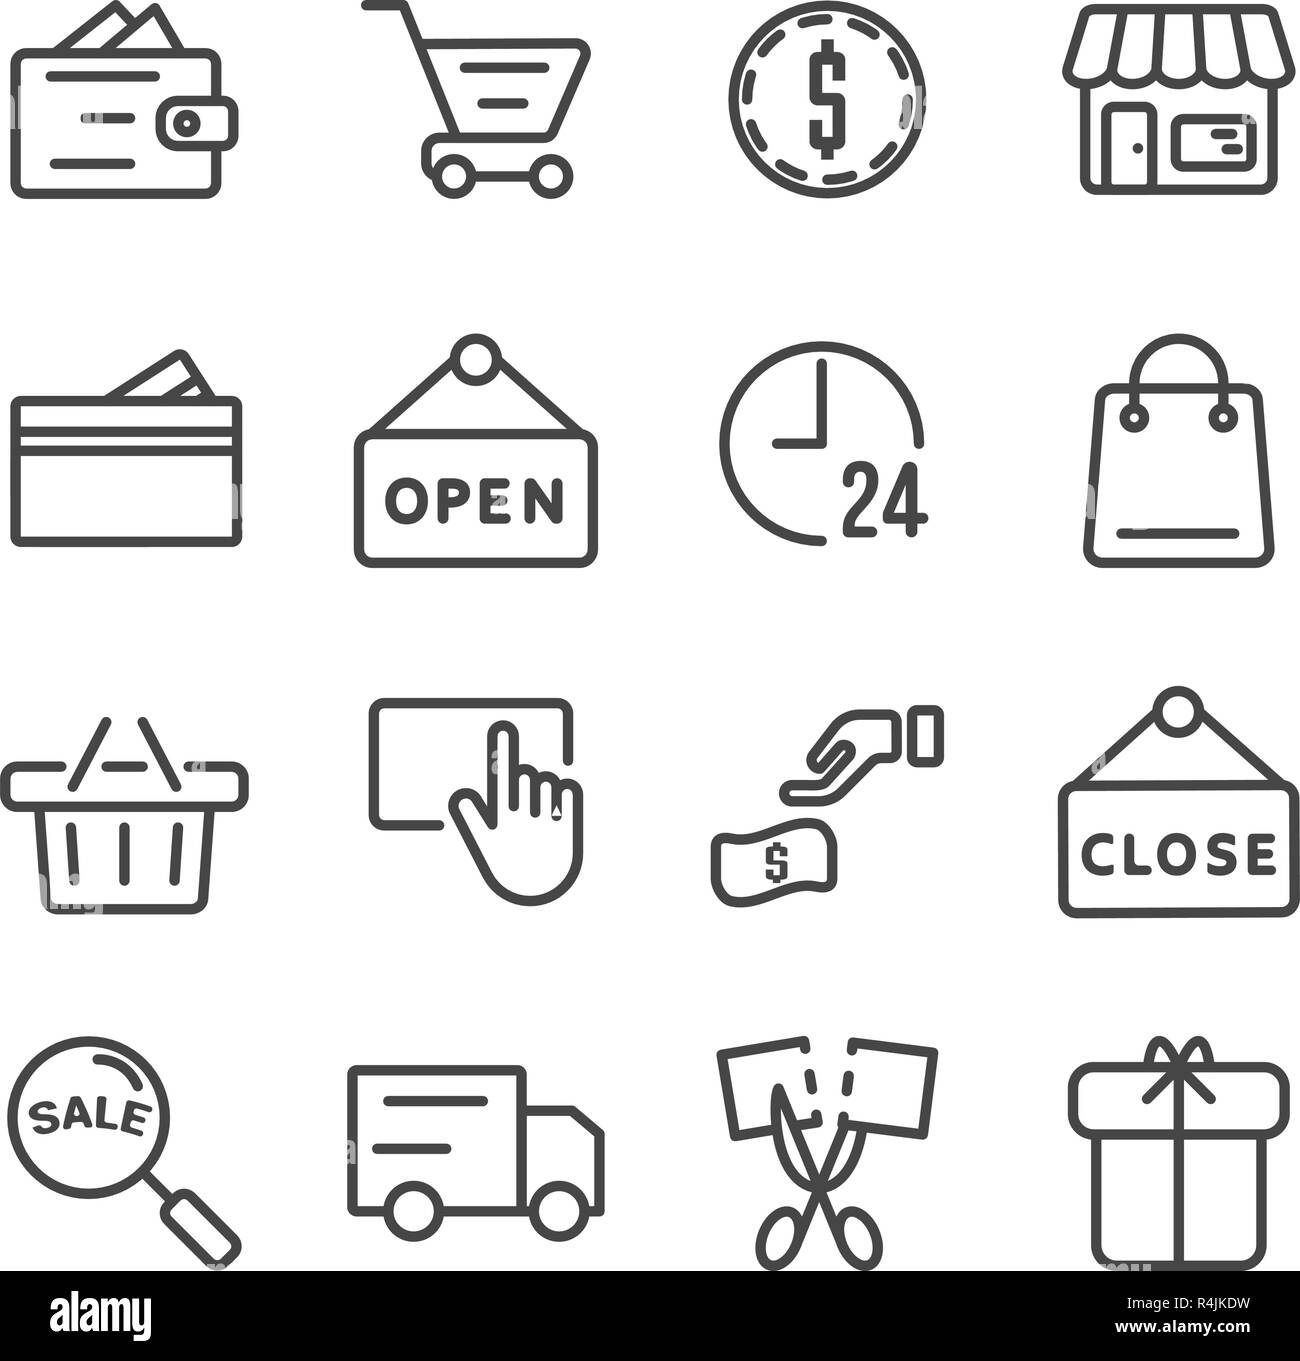 Shopping icon set. Black Friday and Cyber Monday concept Thin line icon theme. Outline stroke symbol icons. White isolated background. Illustration Stock Vector